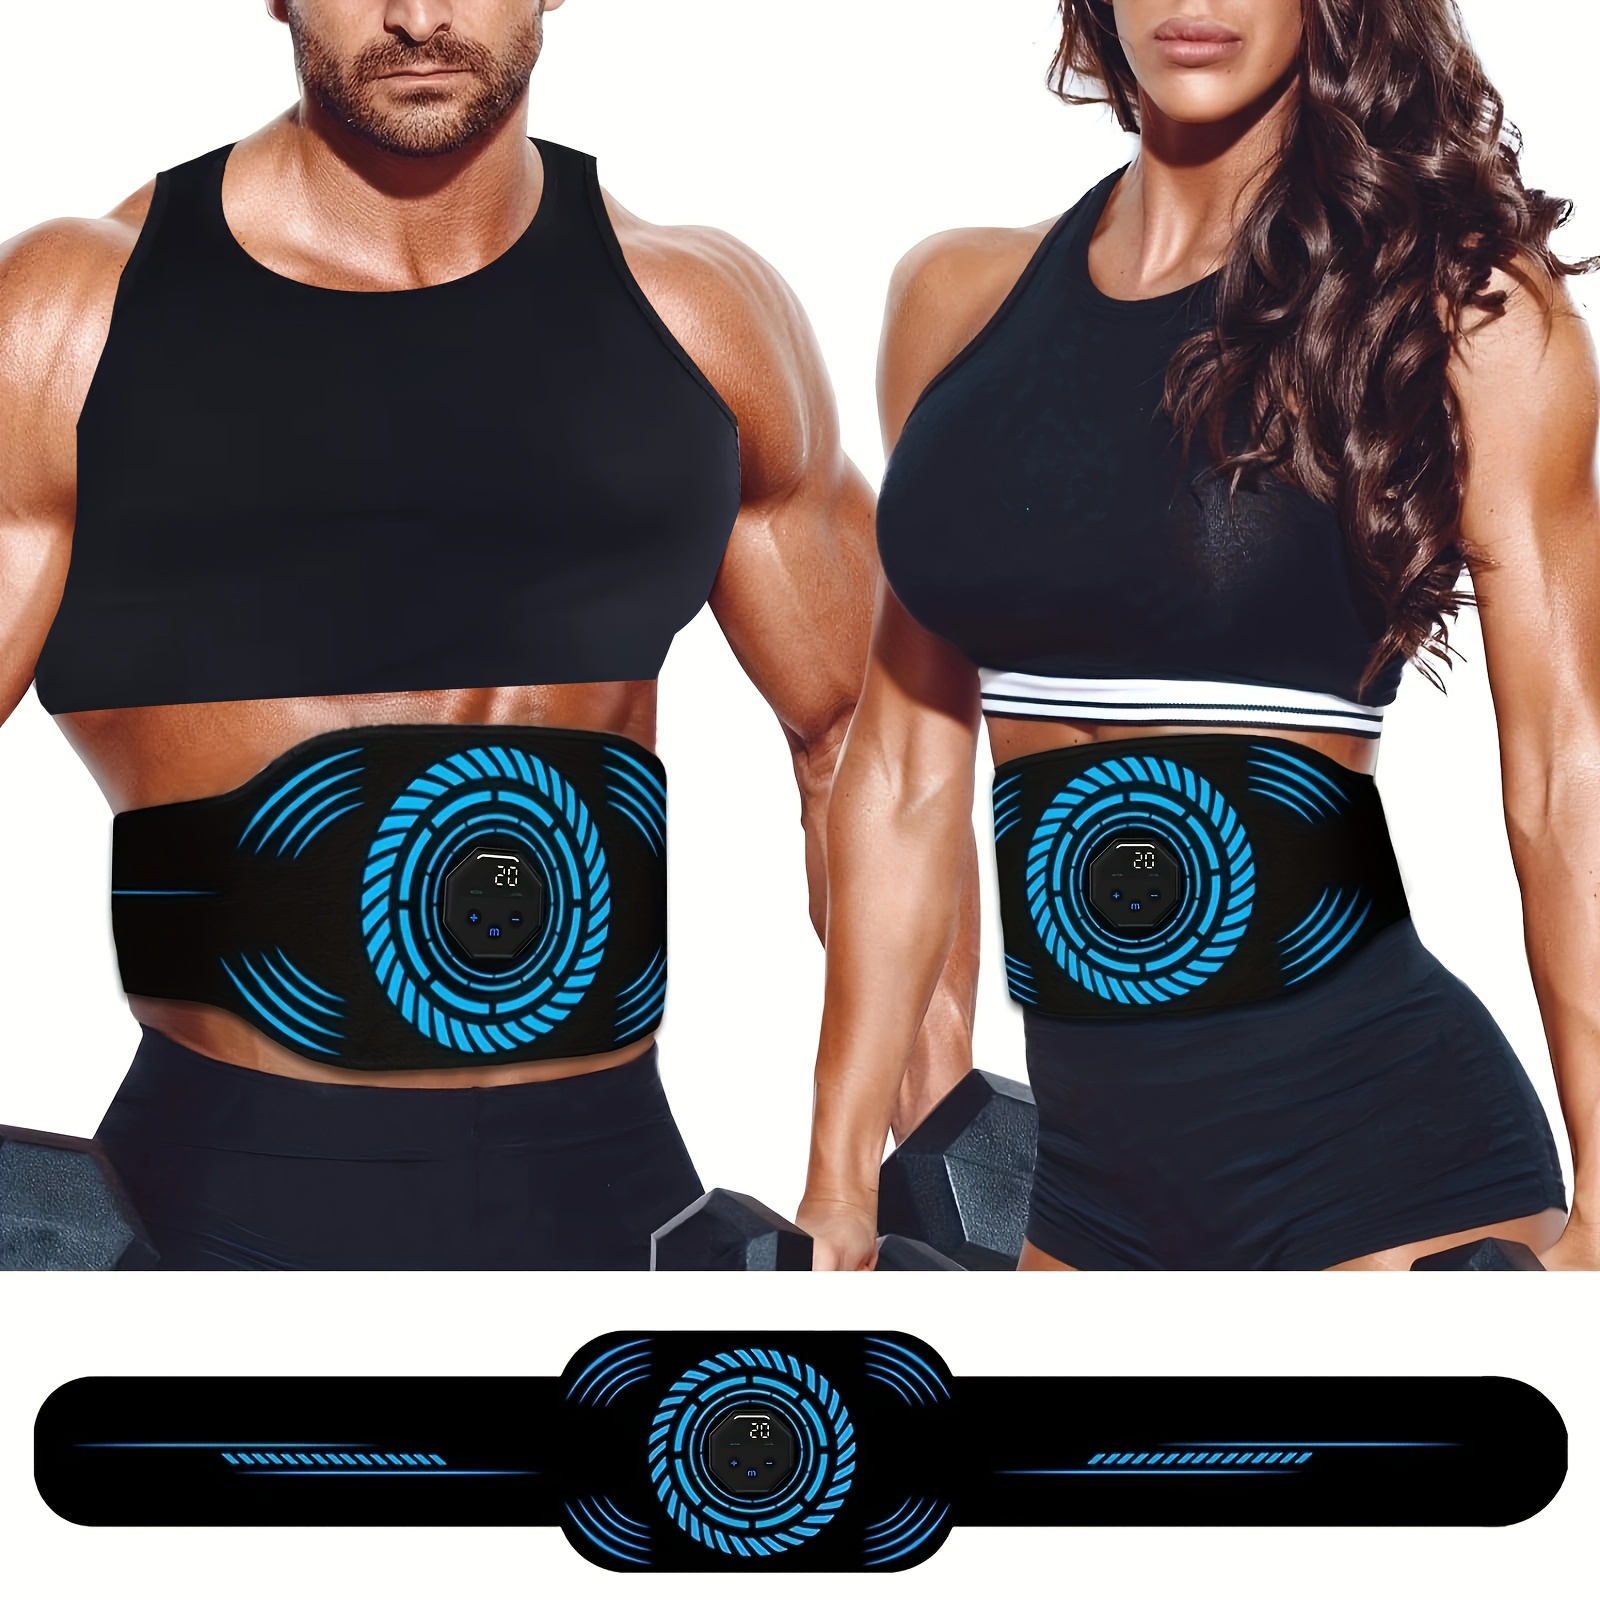 

Abs Stimulator, Ab Machine, Abdominal Toning Belt Home Office Fitness Workout Equipment For Abdomen Ab Stimulator For Men And Women Blue